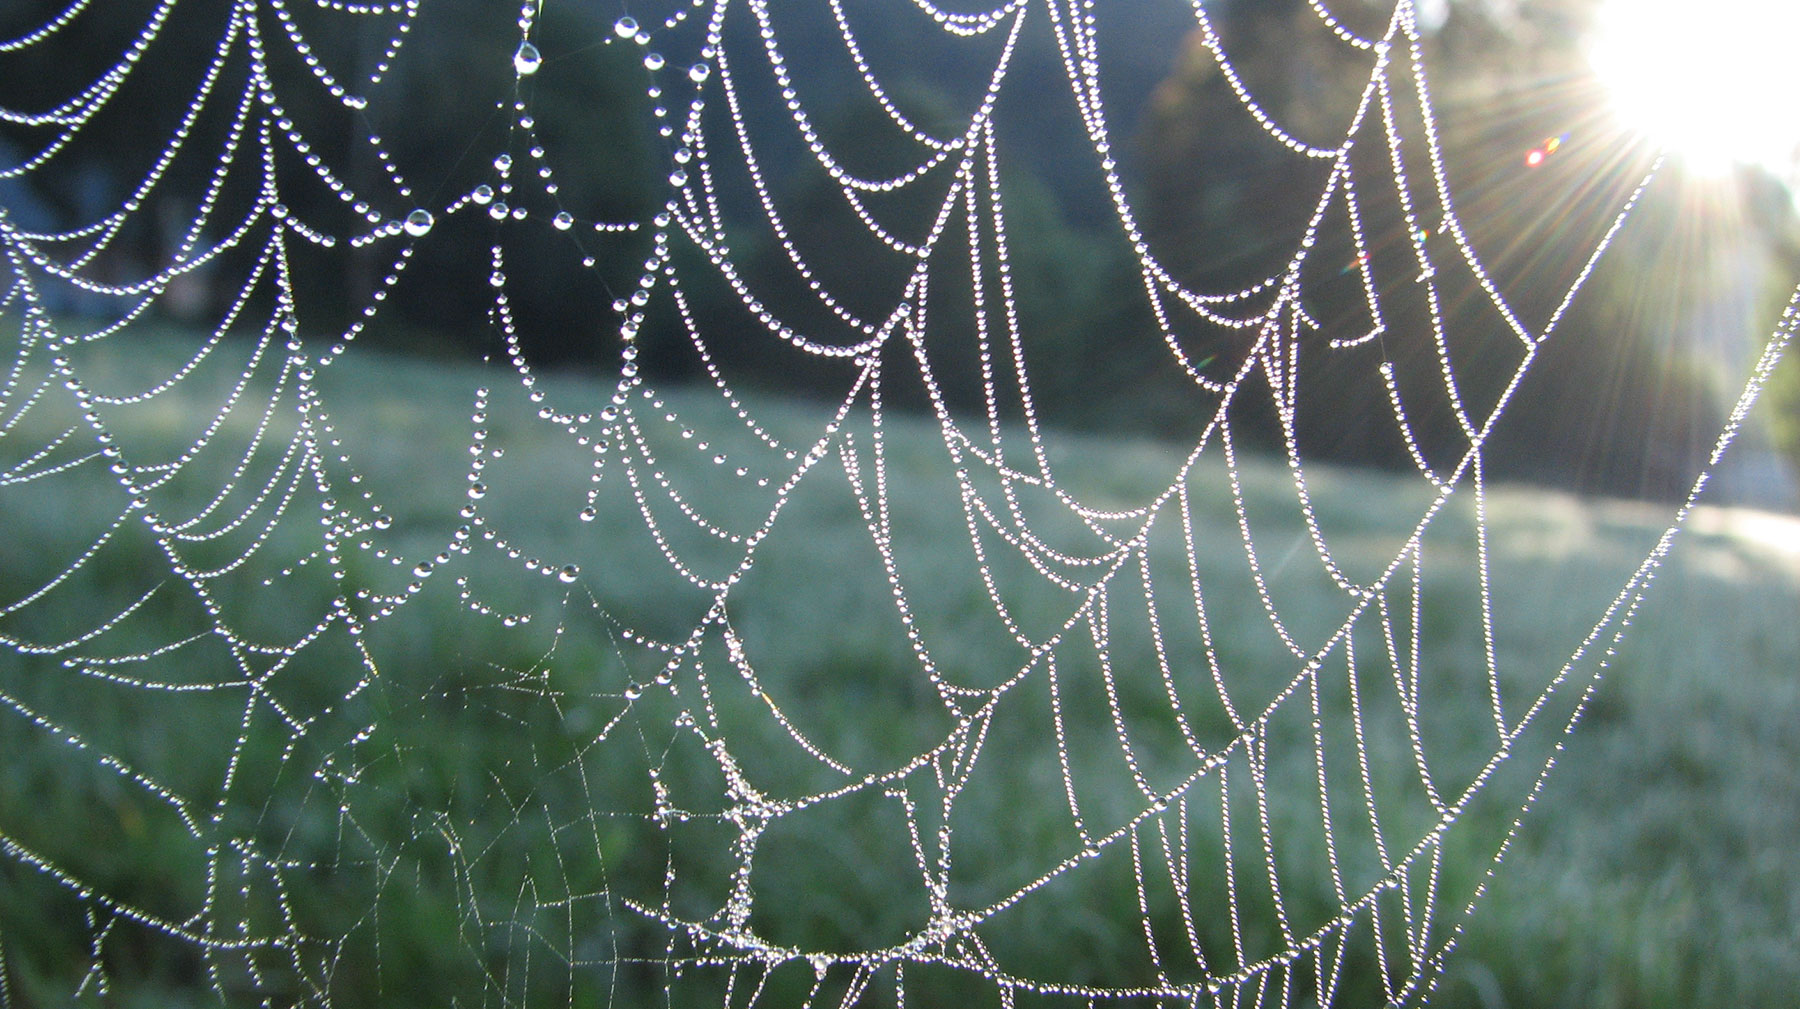 Technical Penguins Content Before Design: A photo of a spiderweb in a field, covered in drops of dew, highlights the idea that something can be both functional and beautiful.